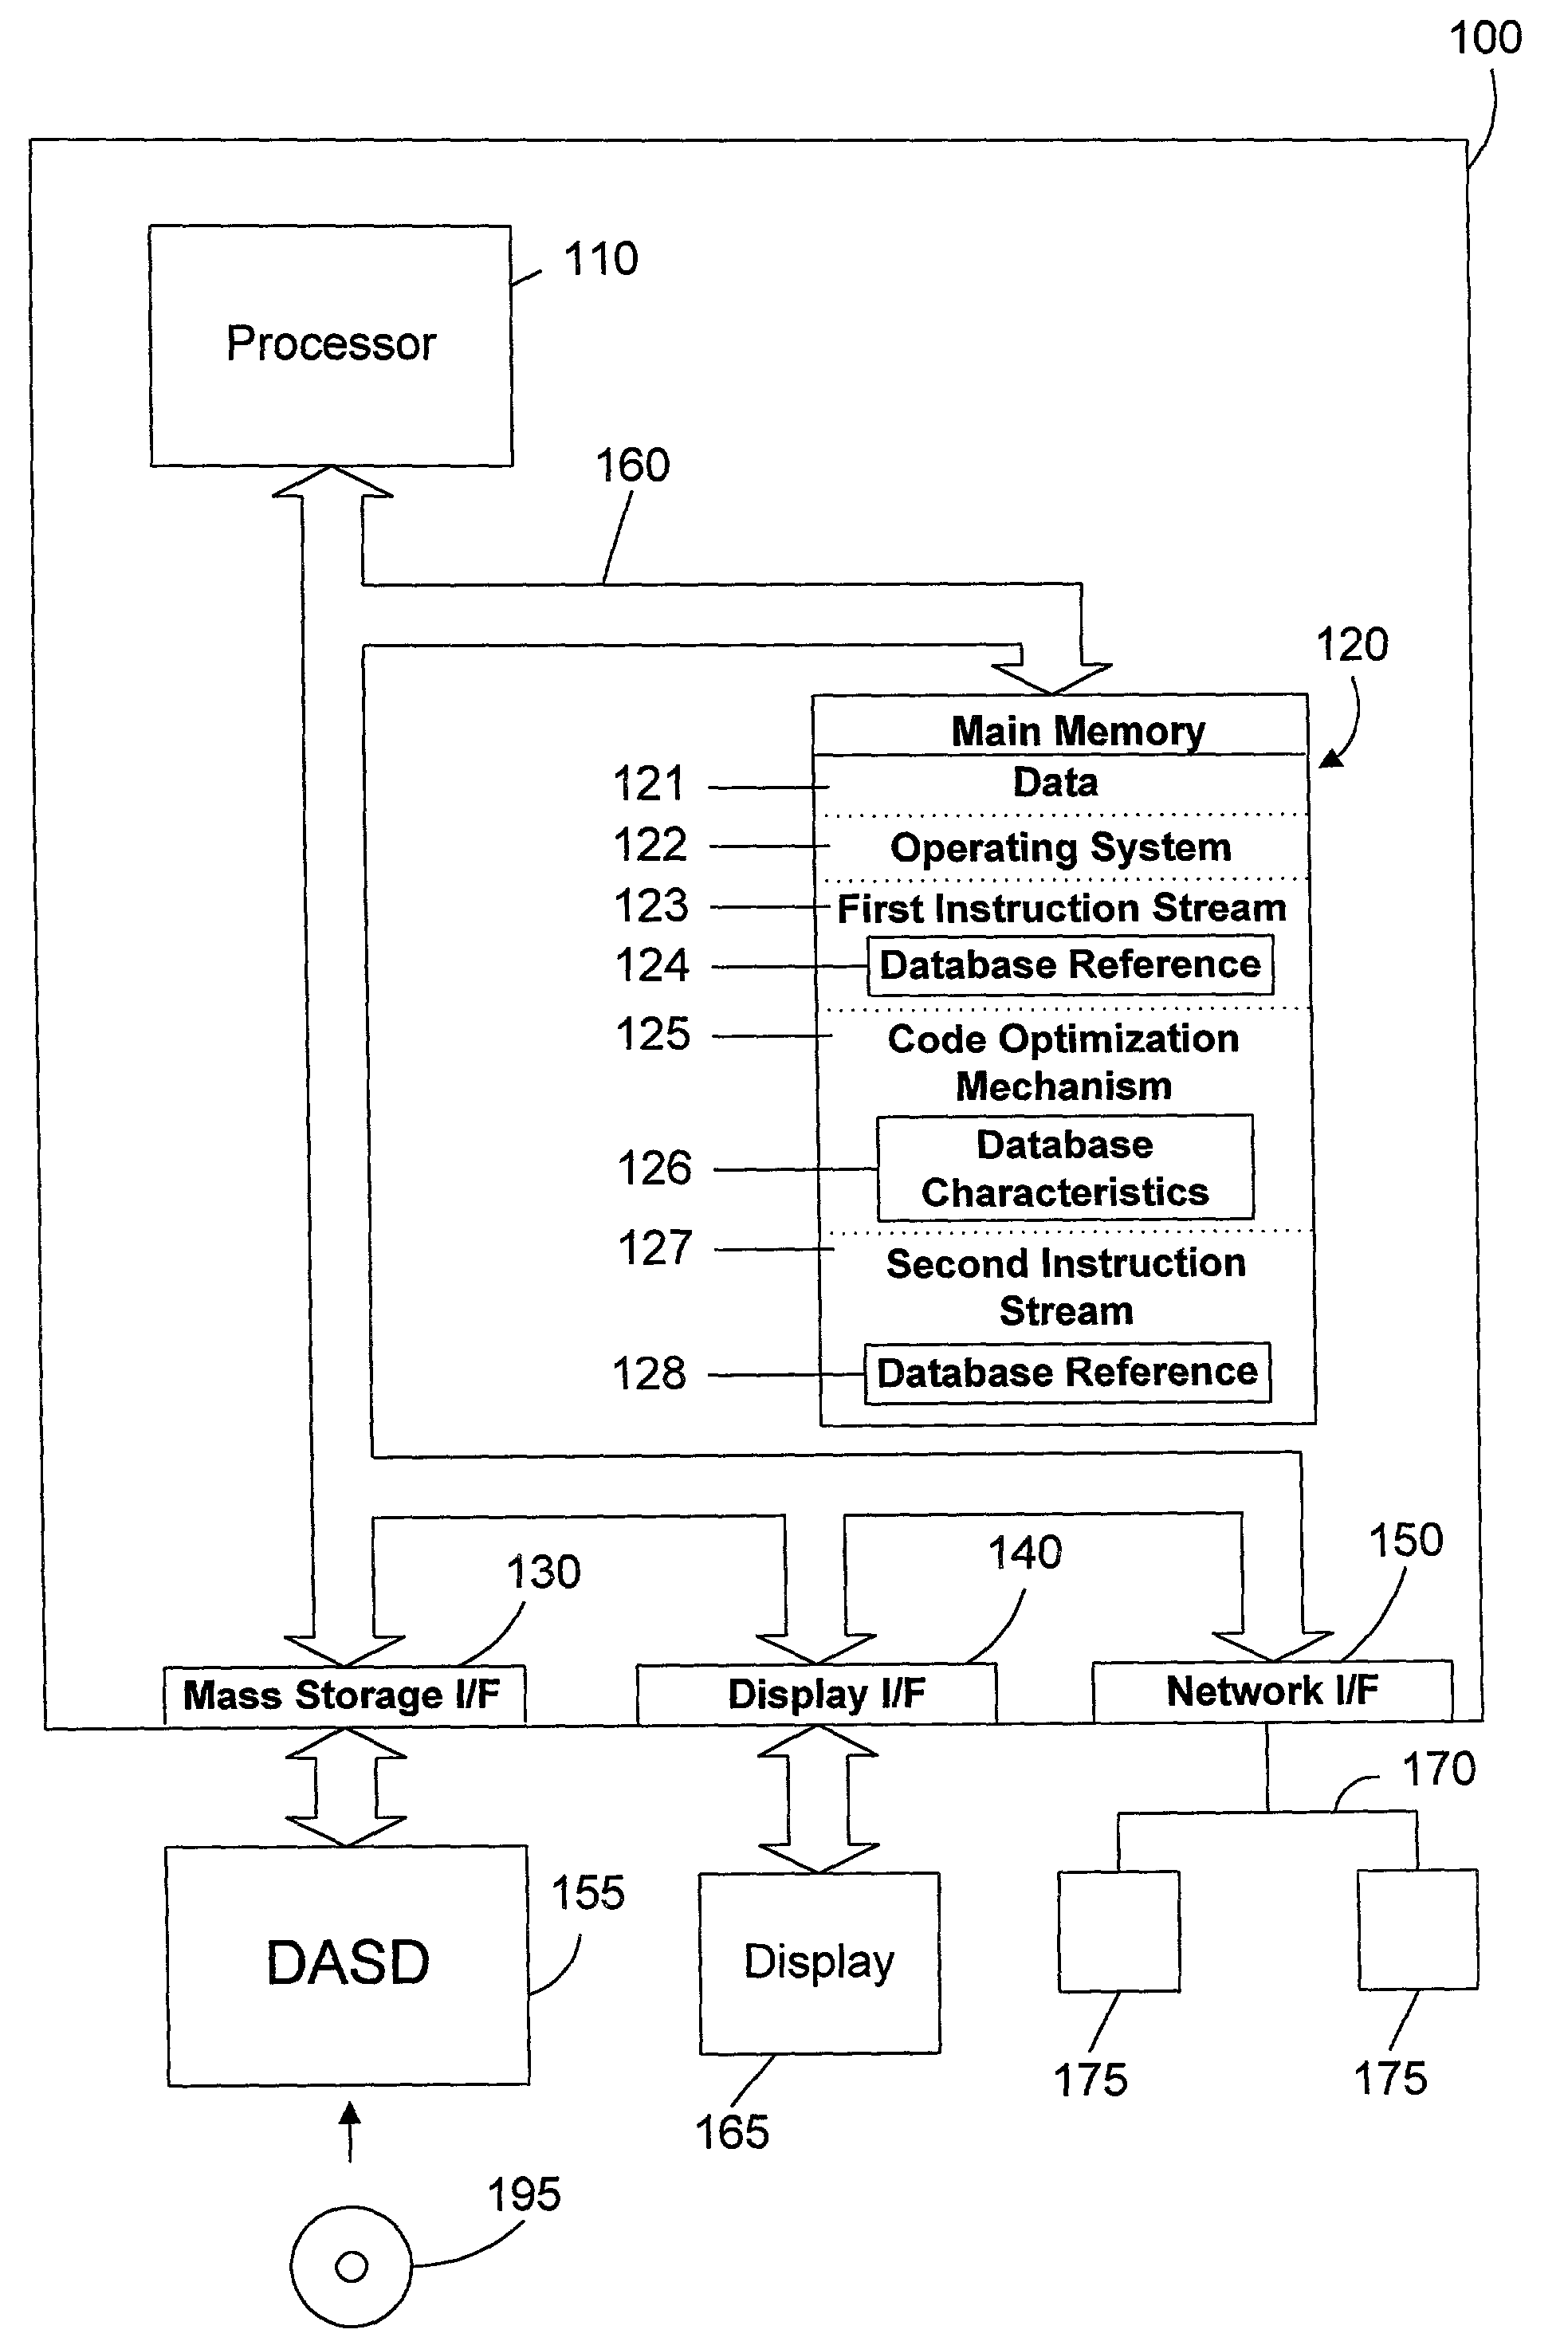 Apparatus and method for using database knowledge to optimize a computer program